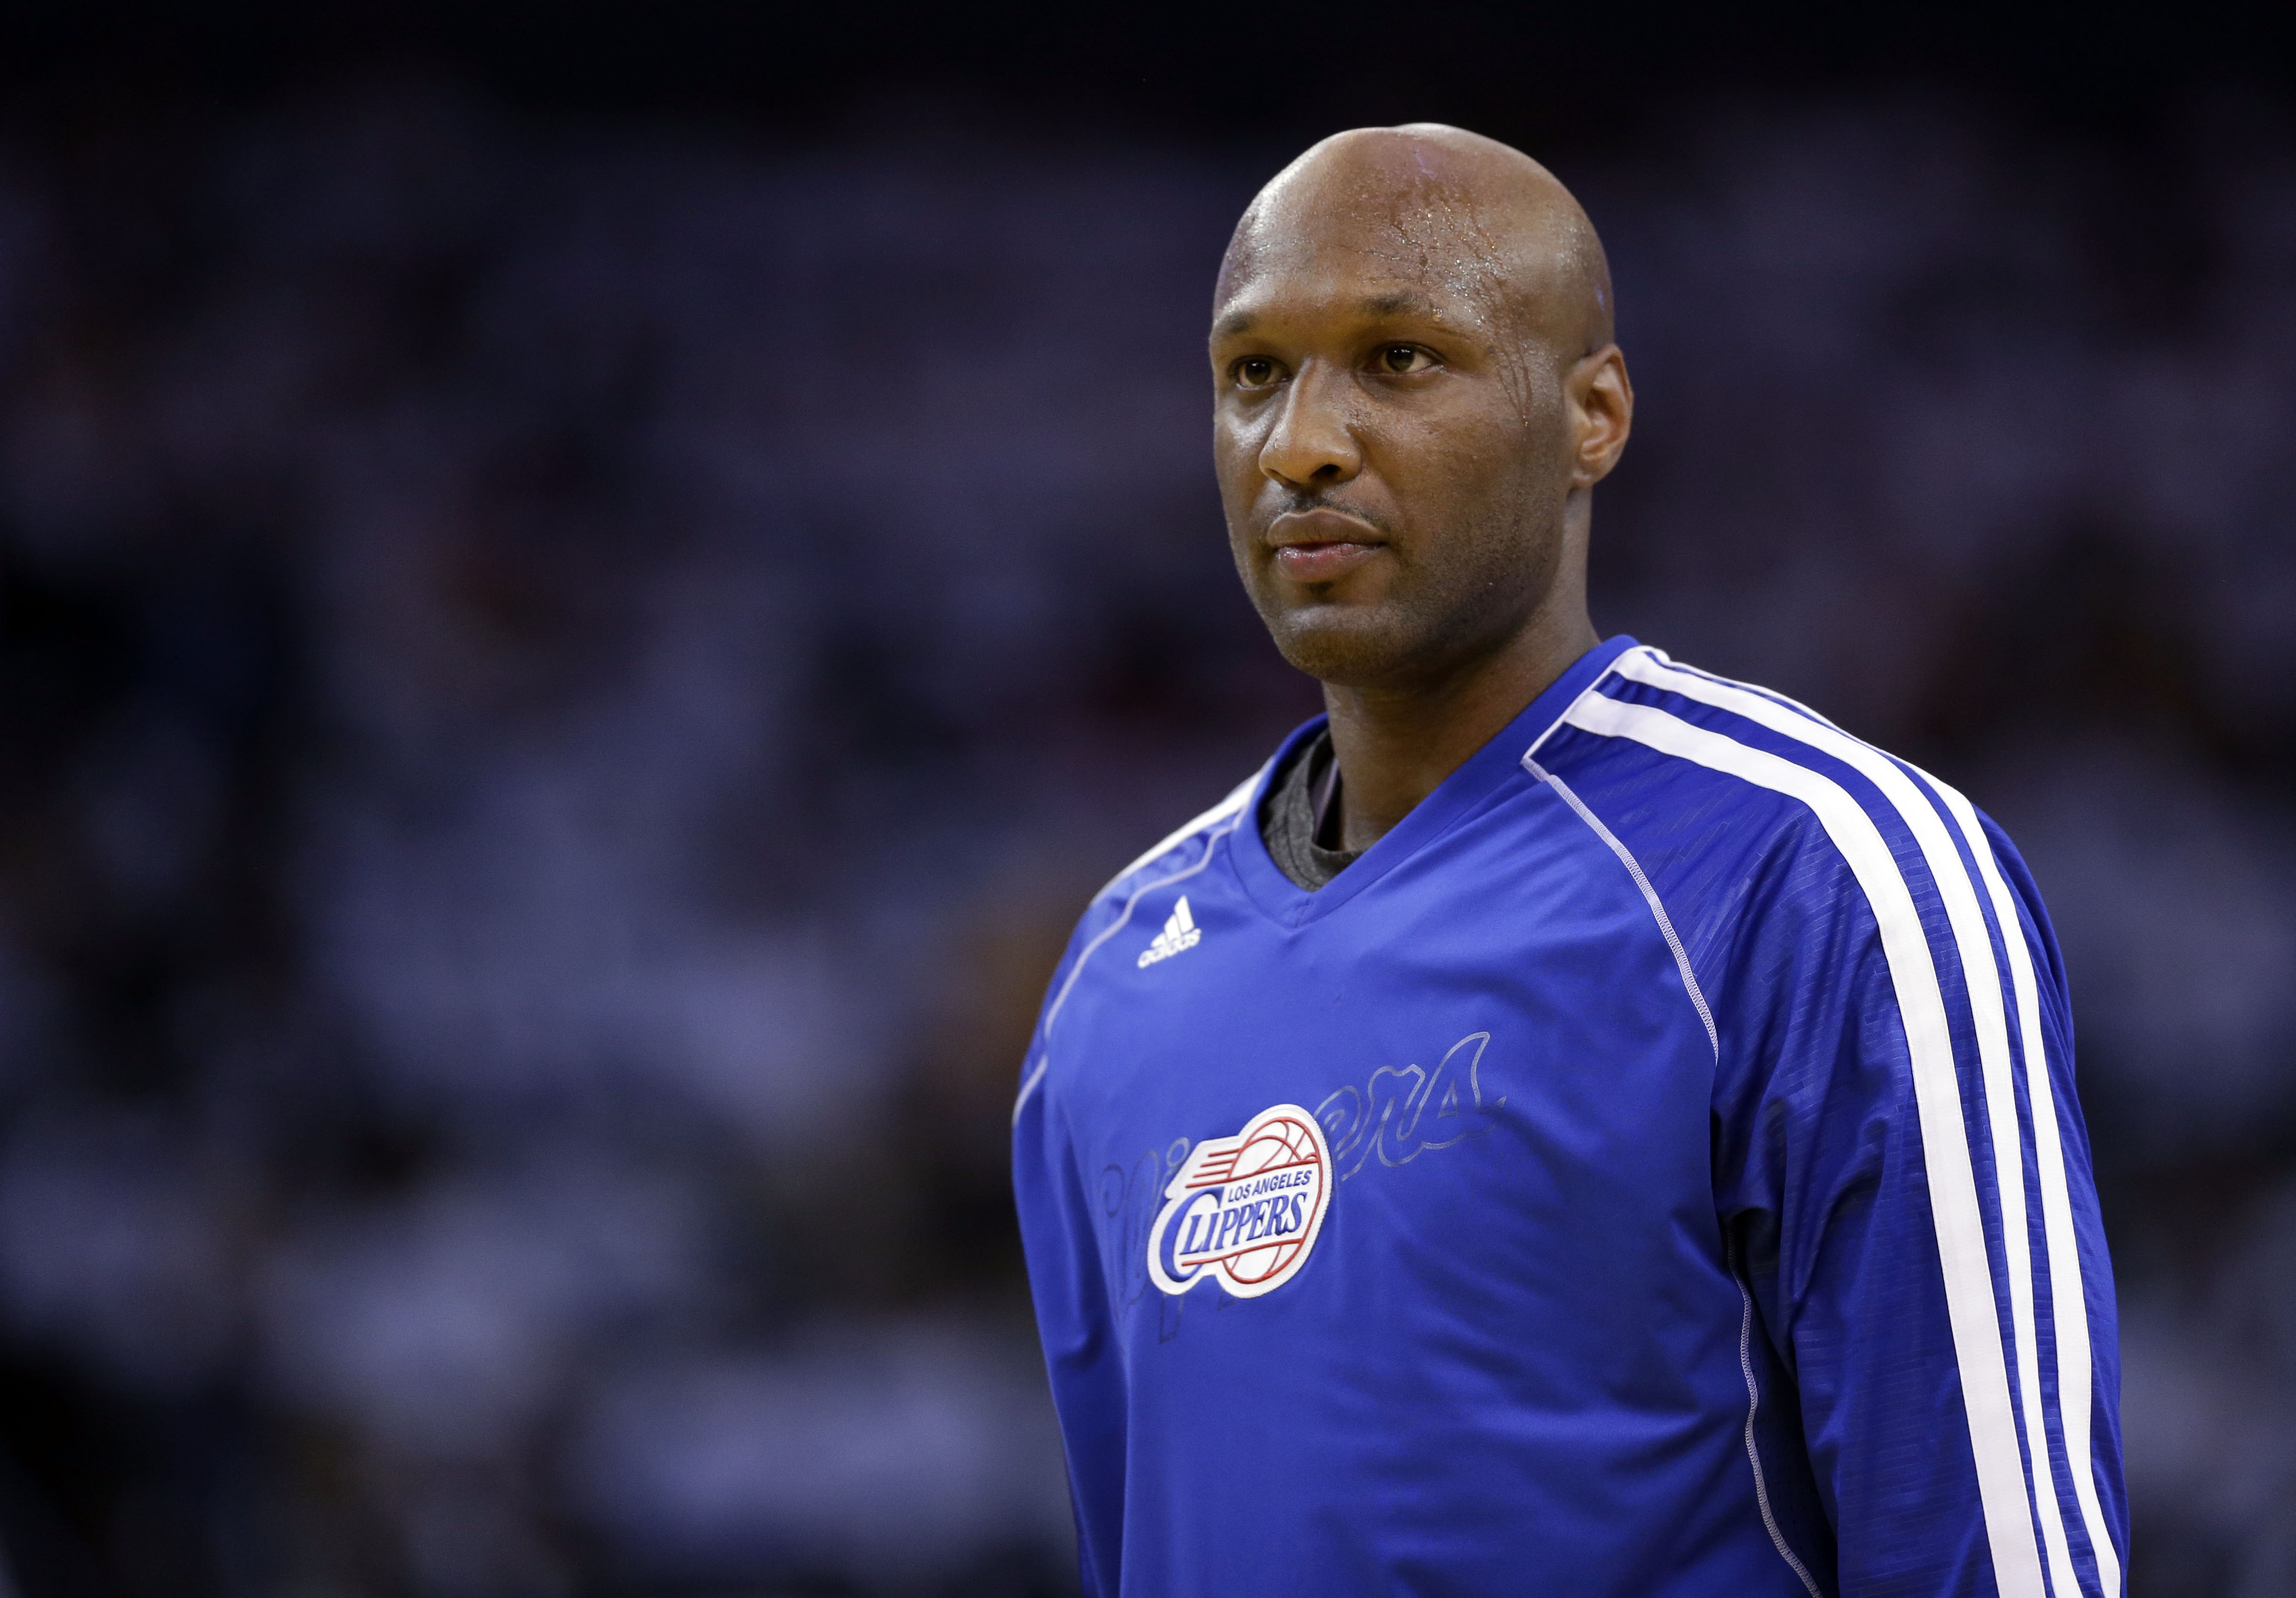 This  file photo shows Los Angeles Clippers' Lamar Odom (7) in action against the Golden State Warriors during an NBA basketball game in Oakland, Calif. on Jan. 2, 2013 (Marcio Jose Sanchez—AP)